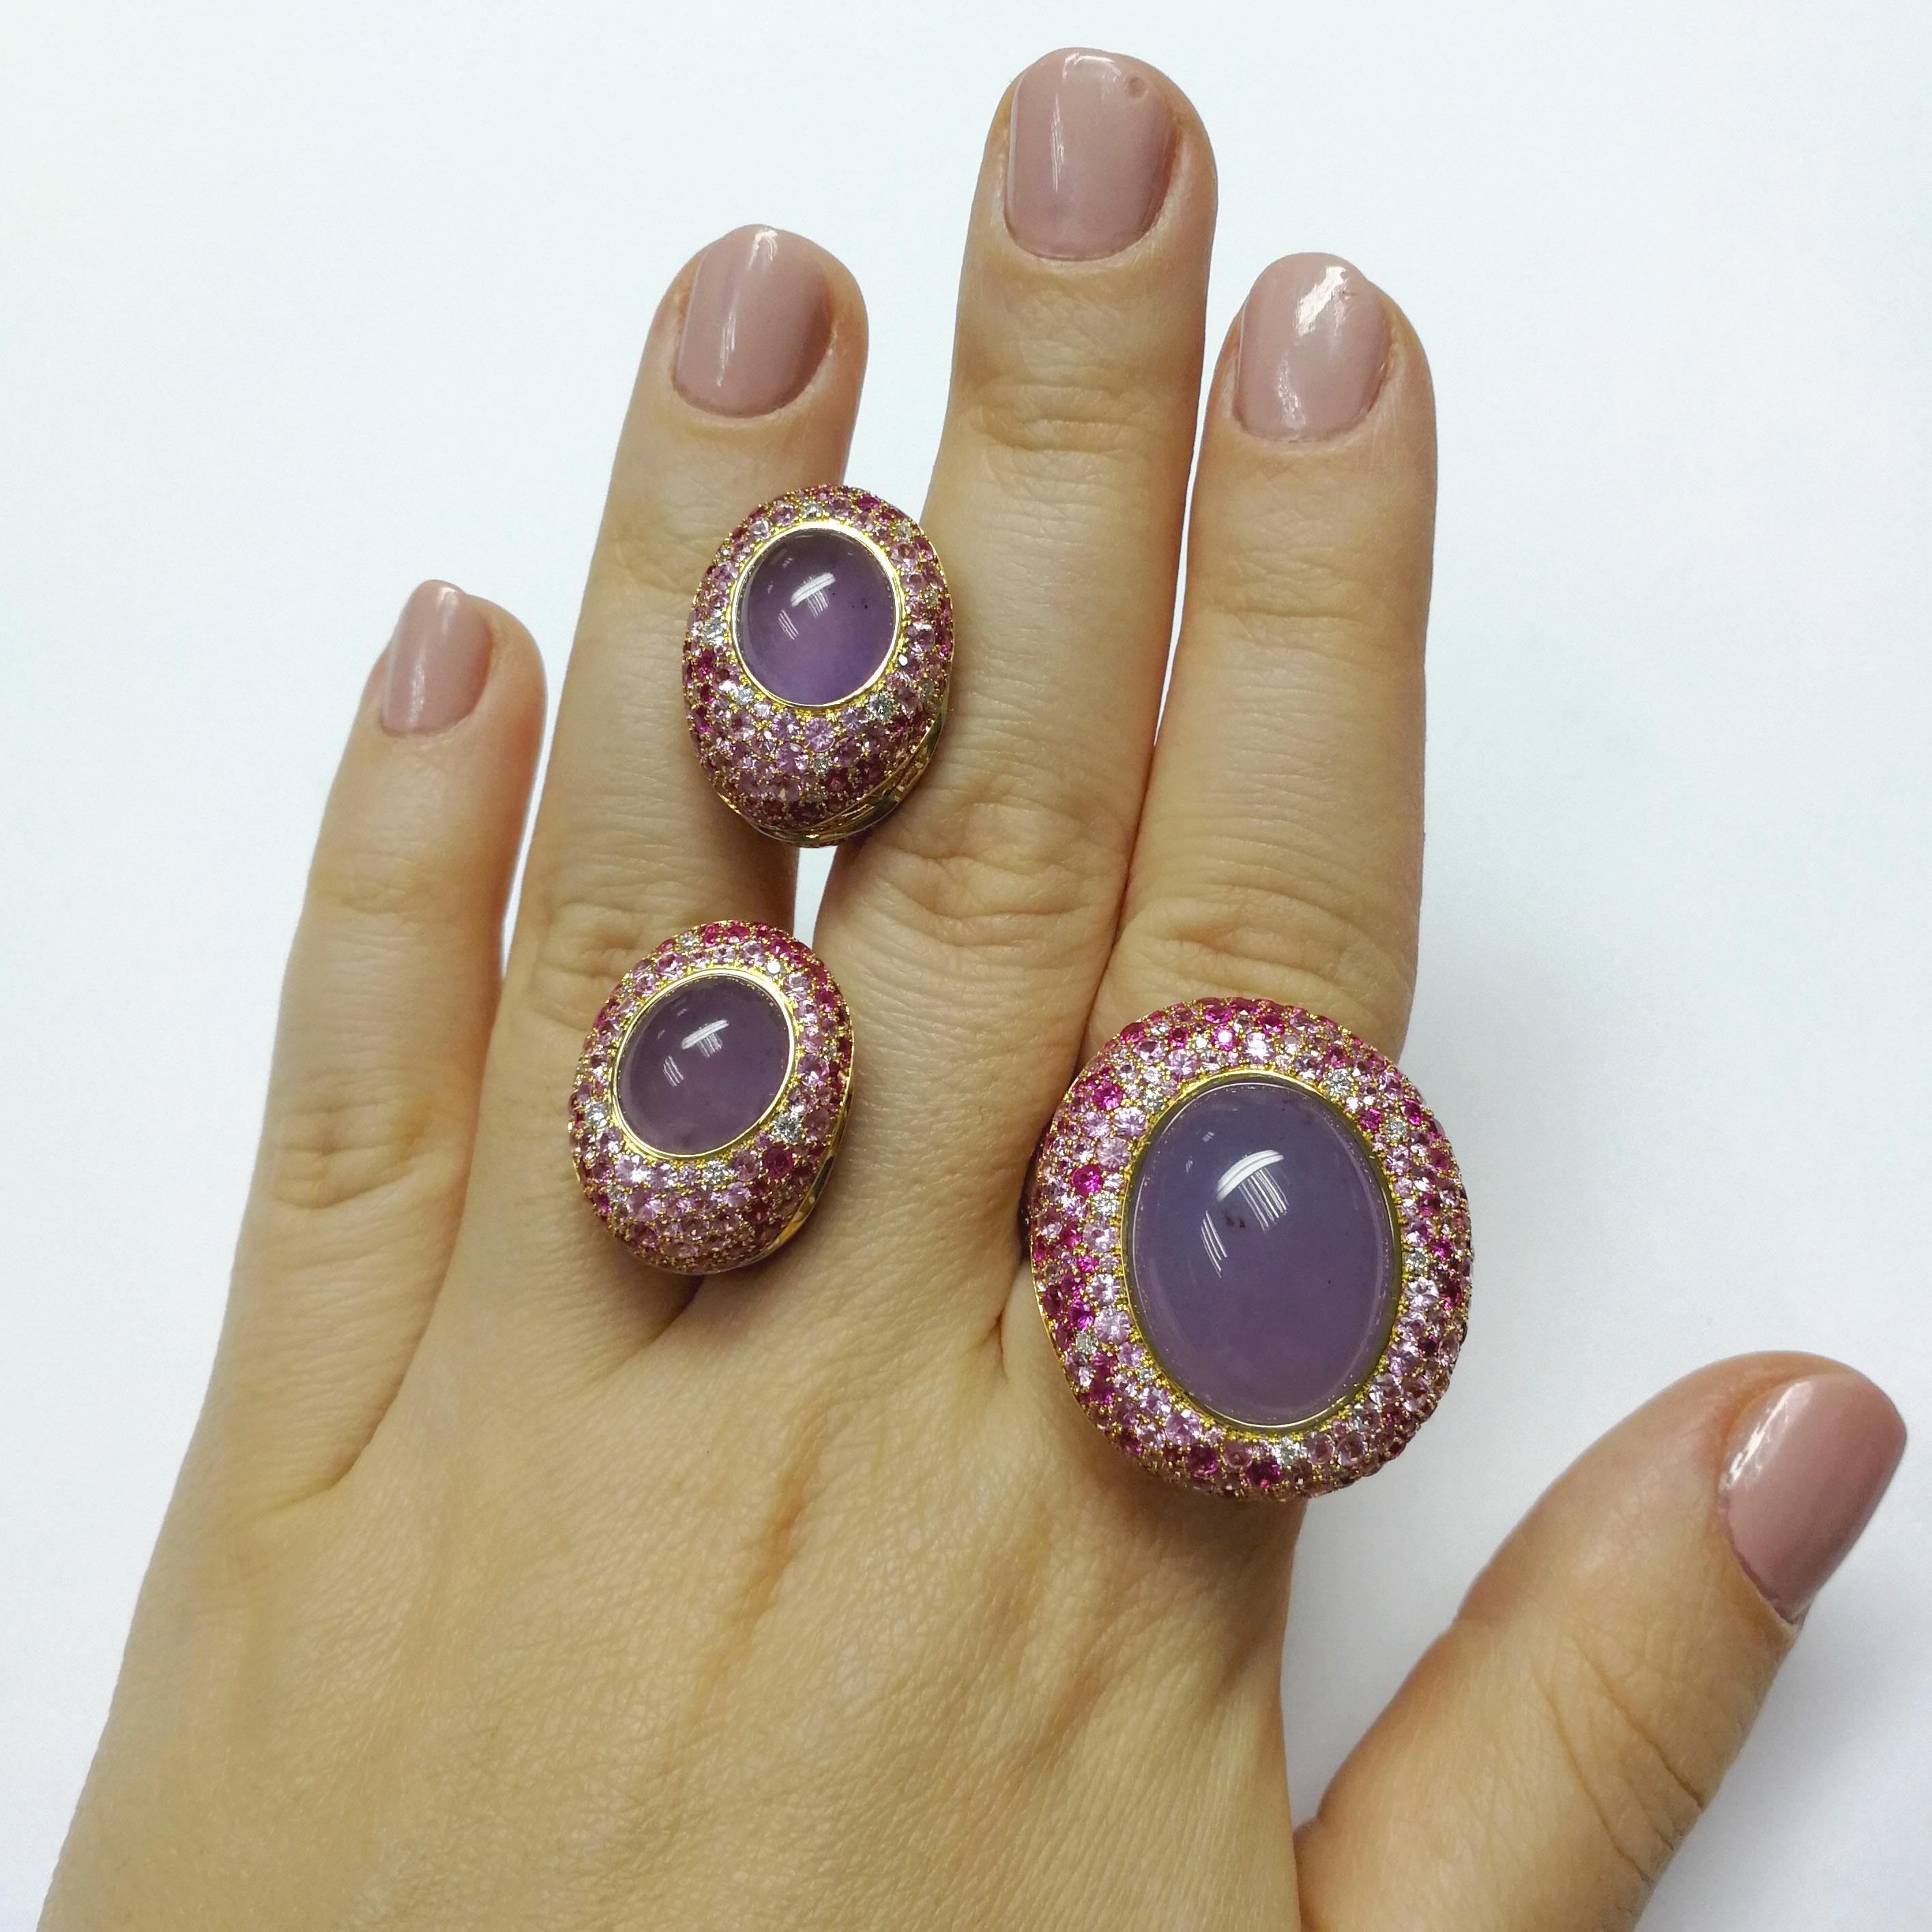 Purple Chalcedony Pink Sapphire Diamonds 18 Karat Yellow Gold Suite
Take a closer look at this Suite in a dazzling combination of 18K Yellow Gold, Purple Chalcedony, Pink Sapphires and Diamonds. The upper part of the Suite is almost detached from